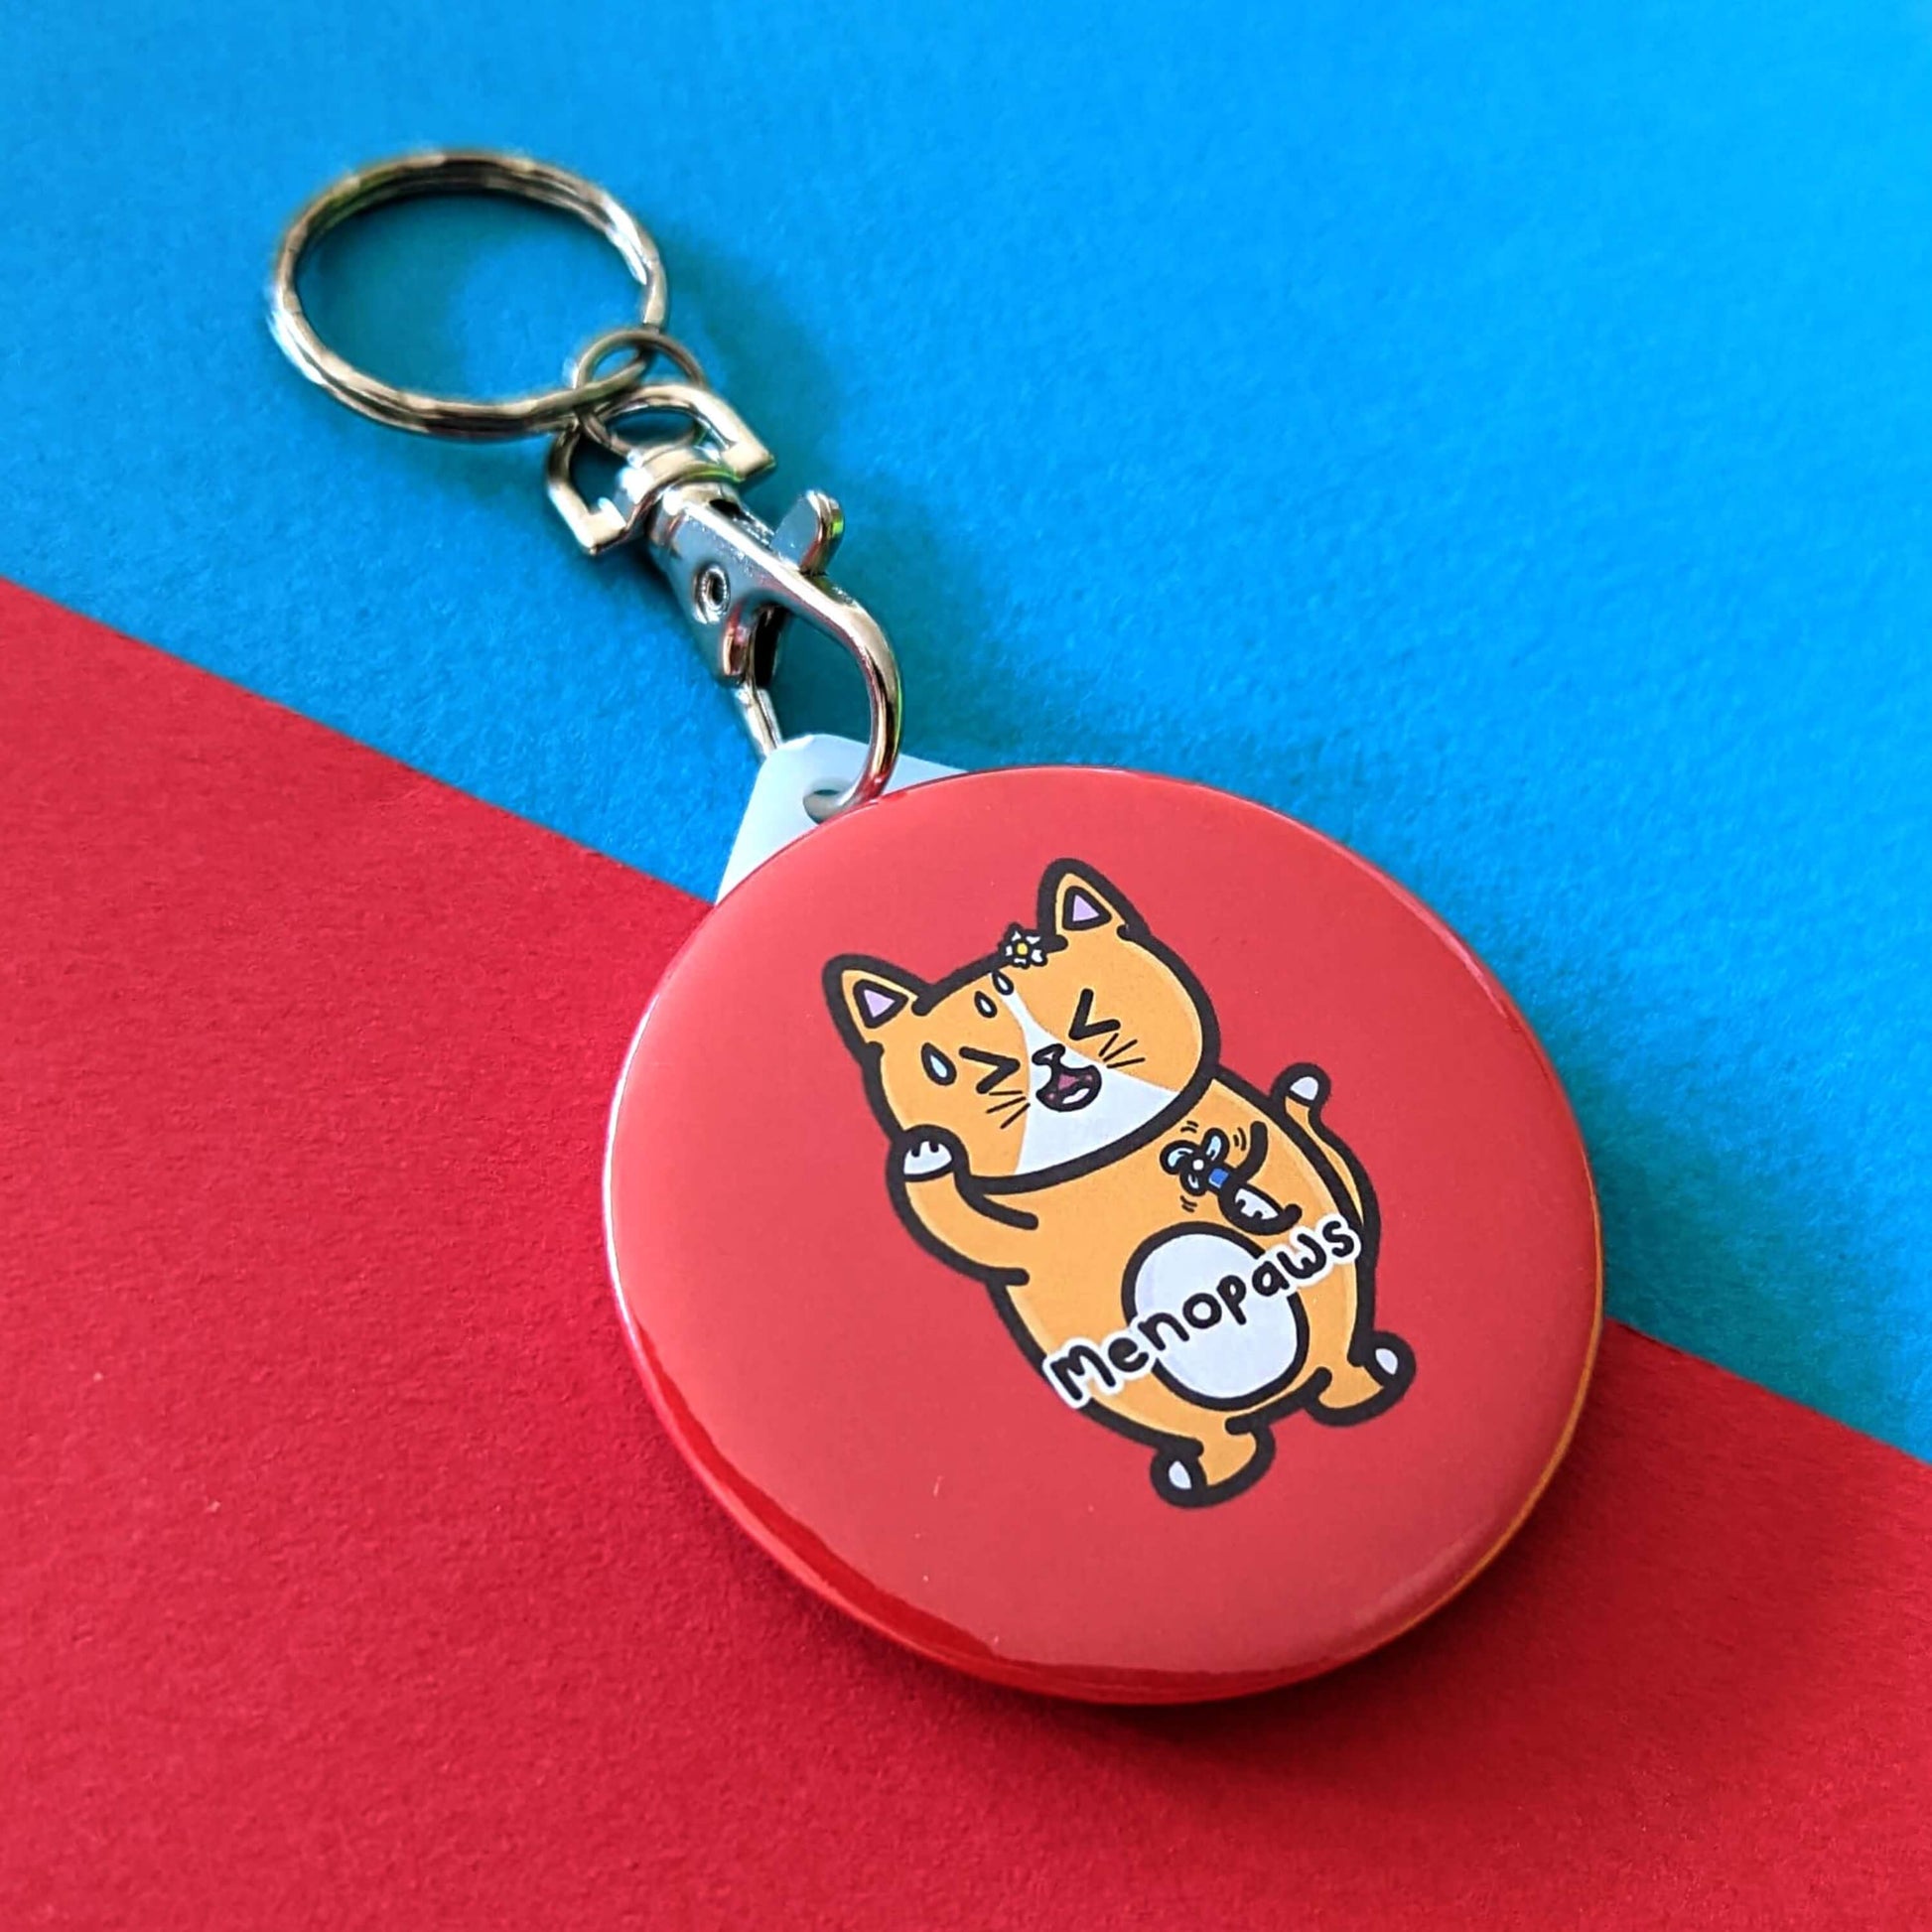 The Menopaws Cat Keyring - Menopause on a red and blue background. The red circular keychain features a stressed sweating orange cat standing up holding a blue mini fan, underneath in black text reading 'menopaws'. Raising awareness for the menopause and menopausal symptoms.